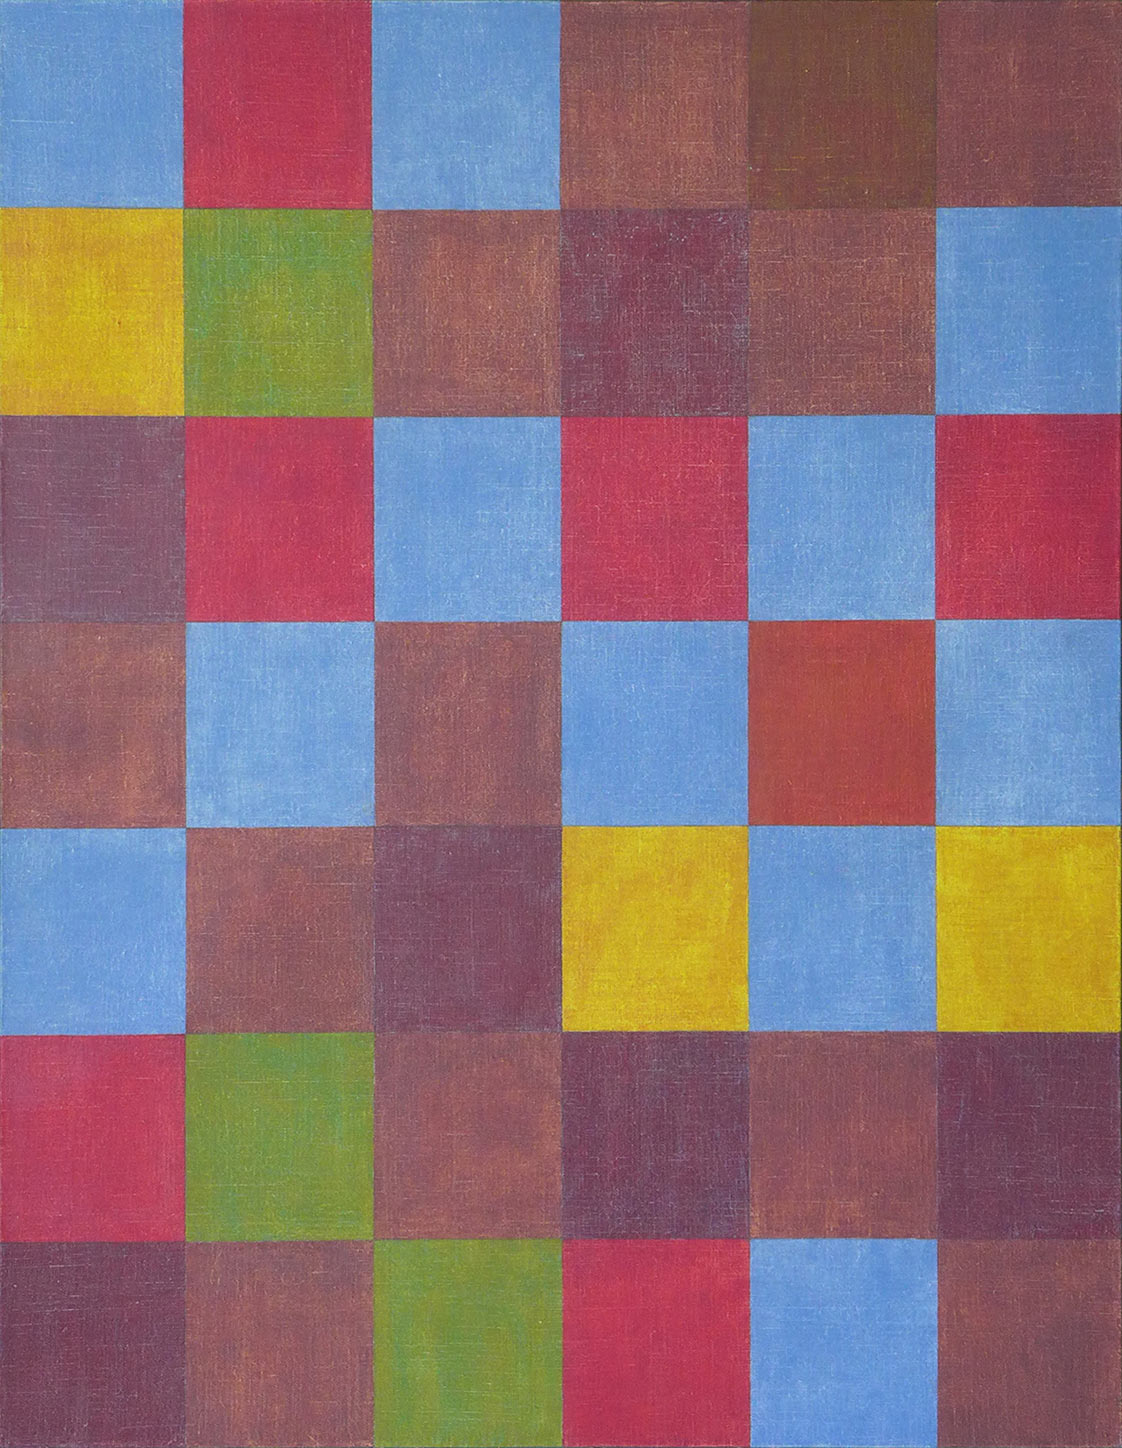 In homage to Paul Klee, a serial re-reading of his painting "New Harmony" drawn with the same geometry and painted with the colors, blue, red and yellow, arranged according to the numbers 2, 3 and 5.